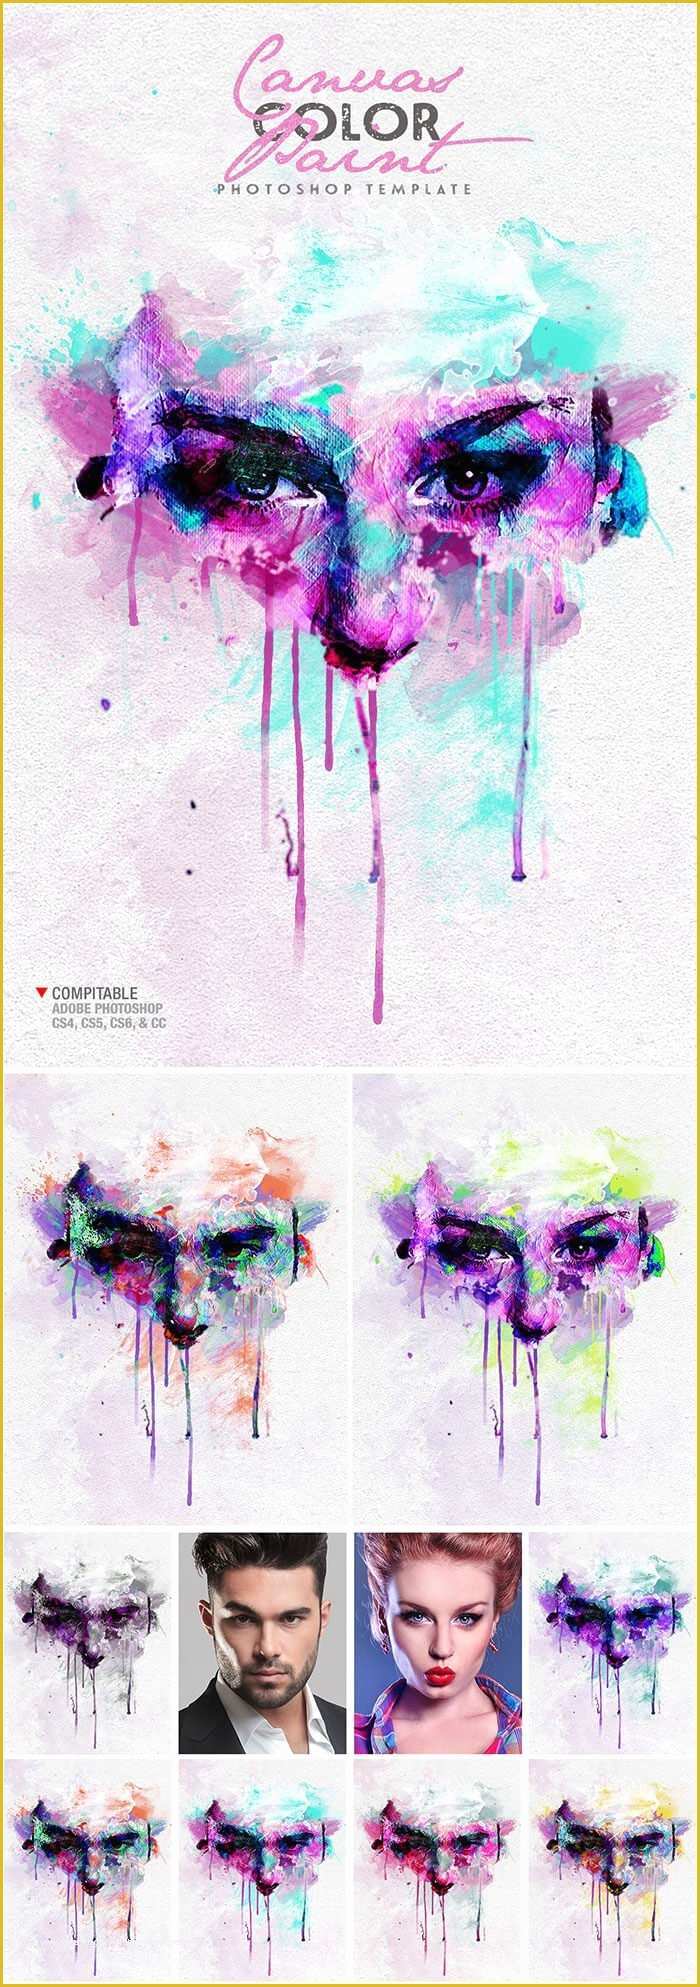 Canvas Painting Templates Free Of Artistic Fx Bundle with 25 Ps Actions and Templates